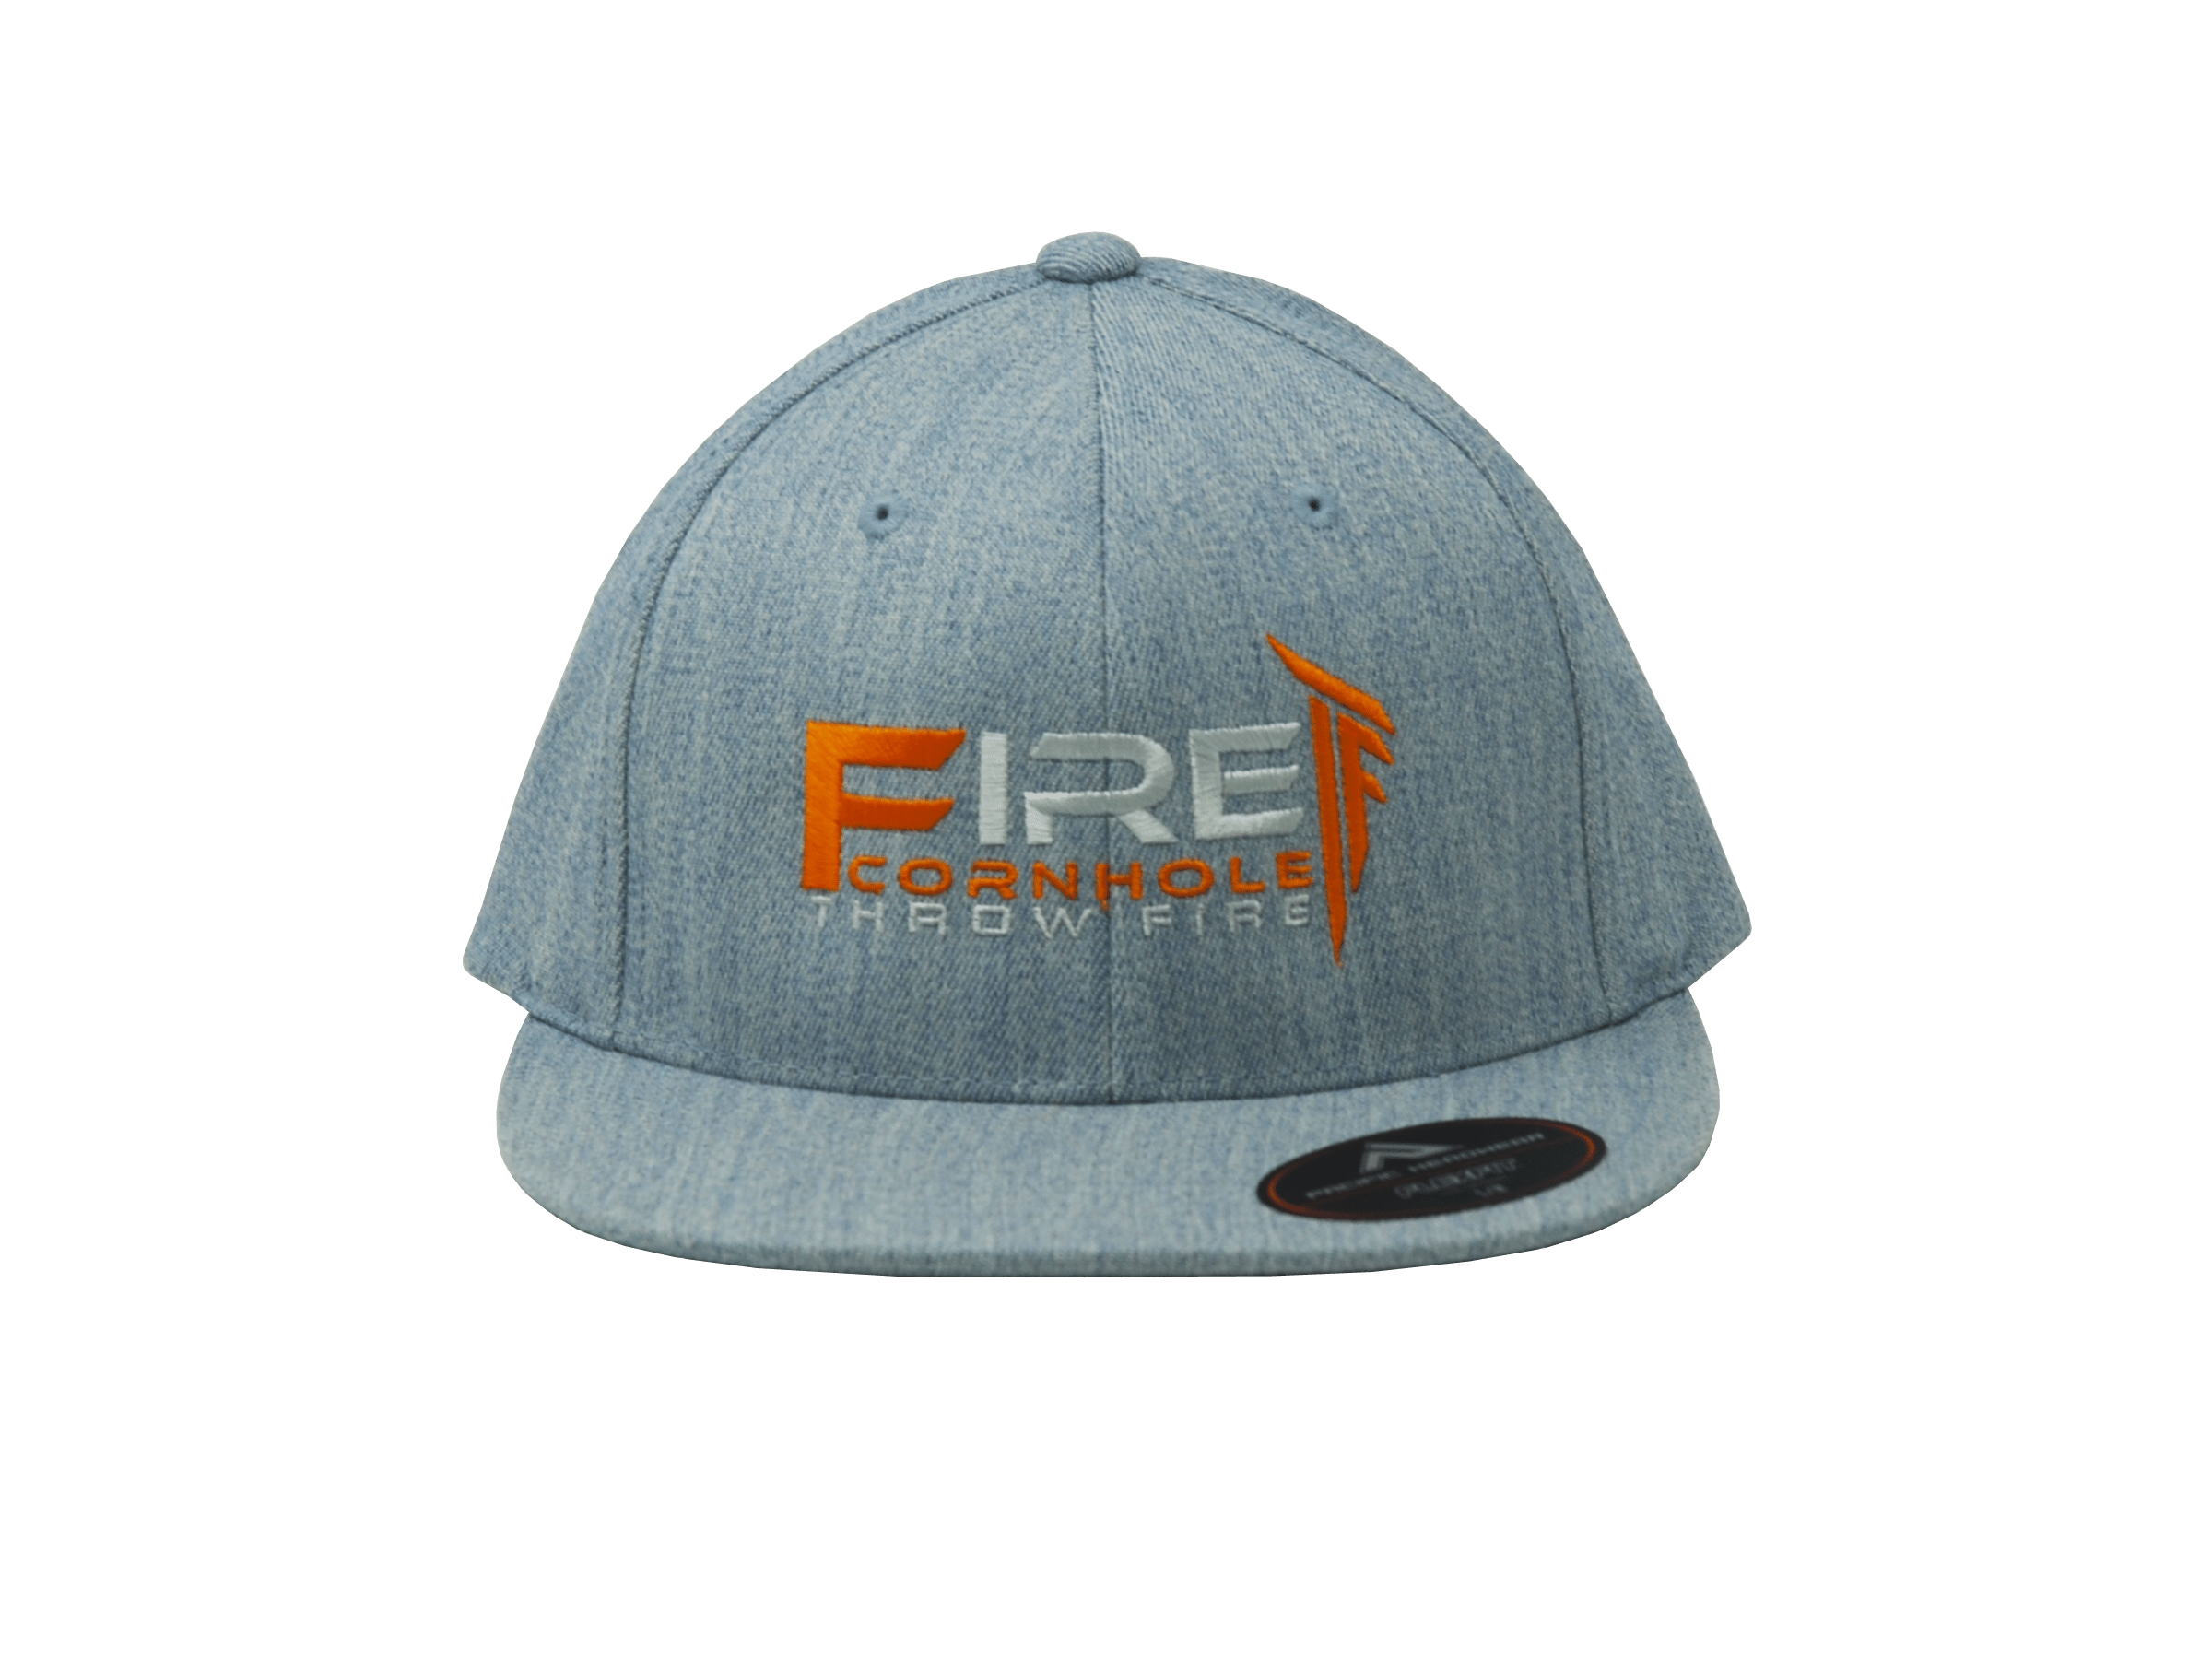 Grey flat bill hat with orange Fire Cornhole logo embroidered on the front